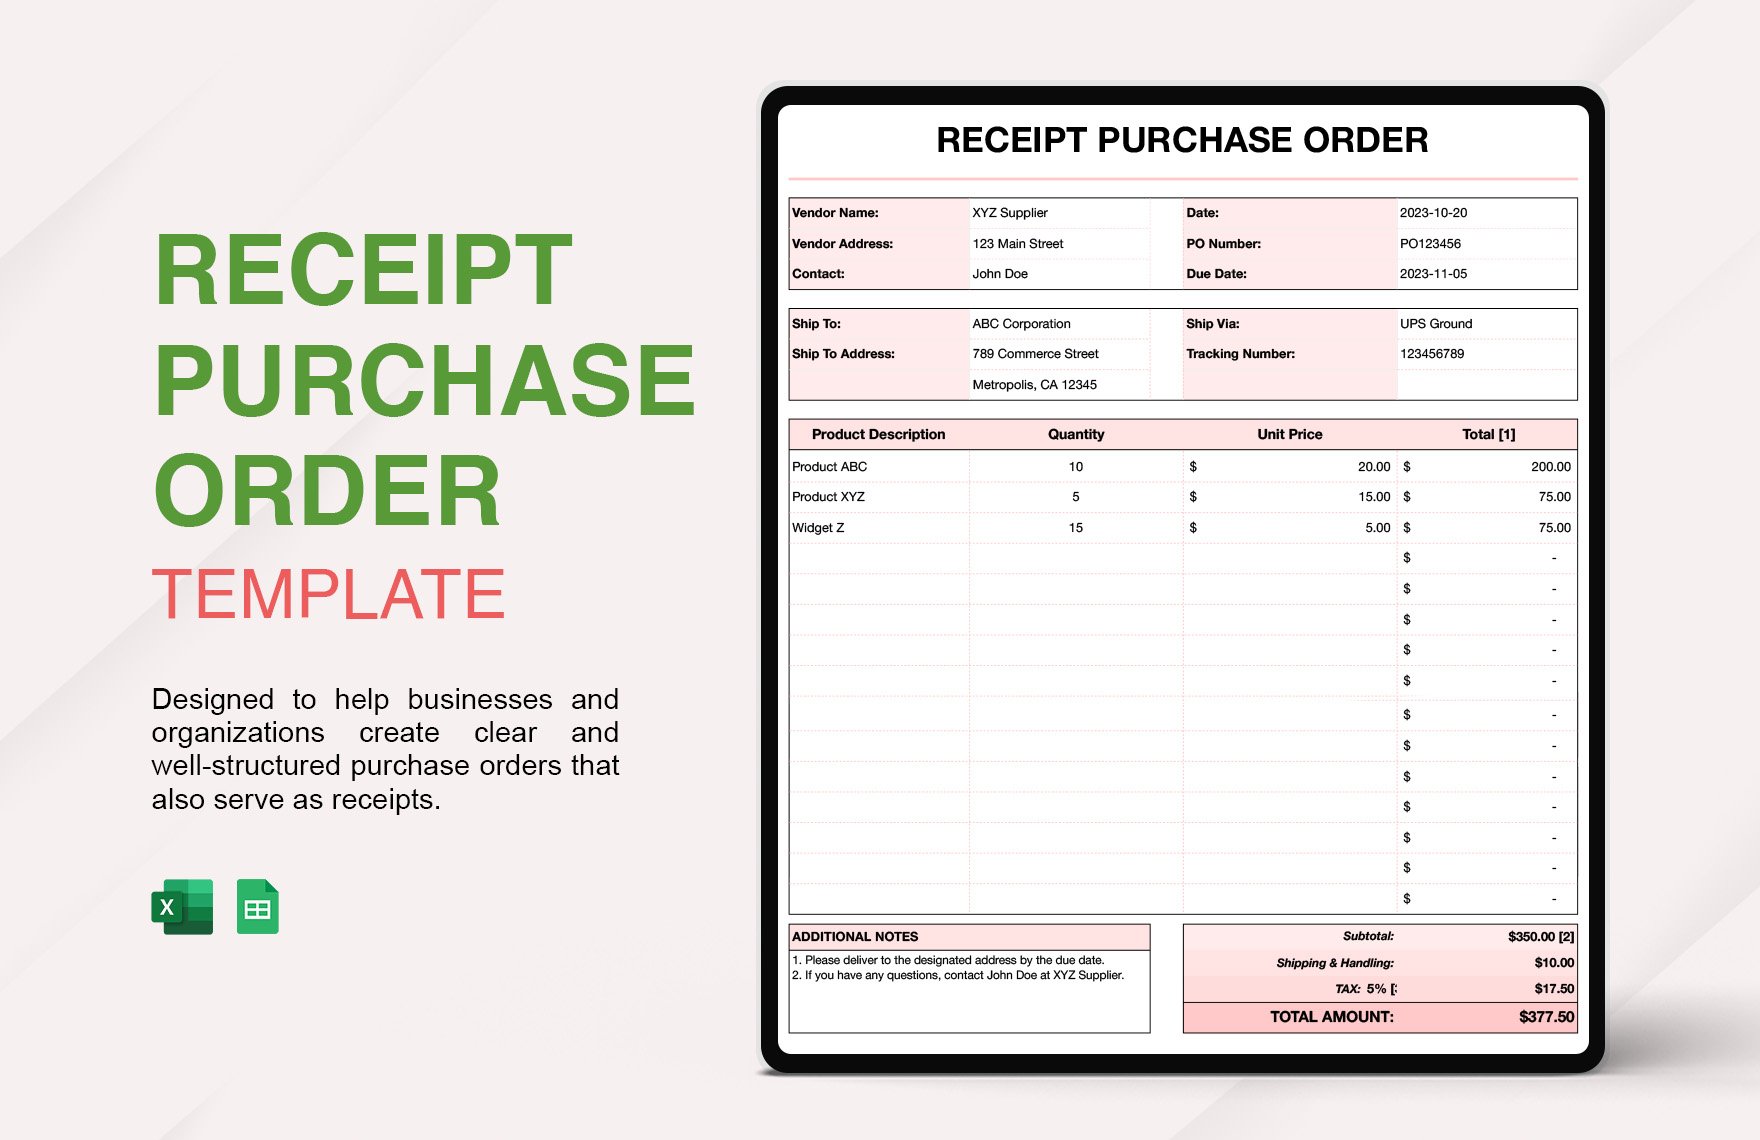 Free Receipt Purchase Order Template in Excel, Google Sheets